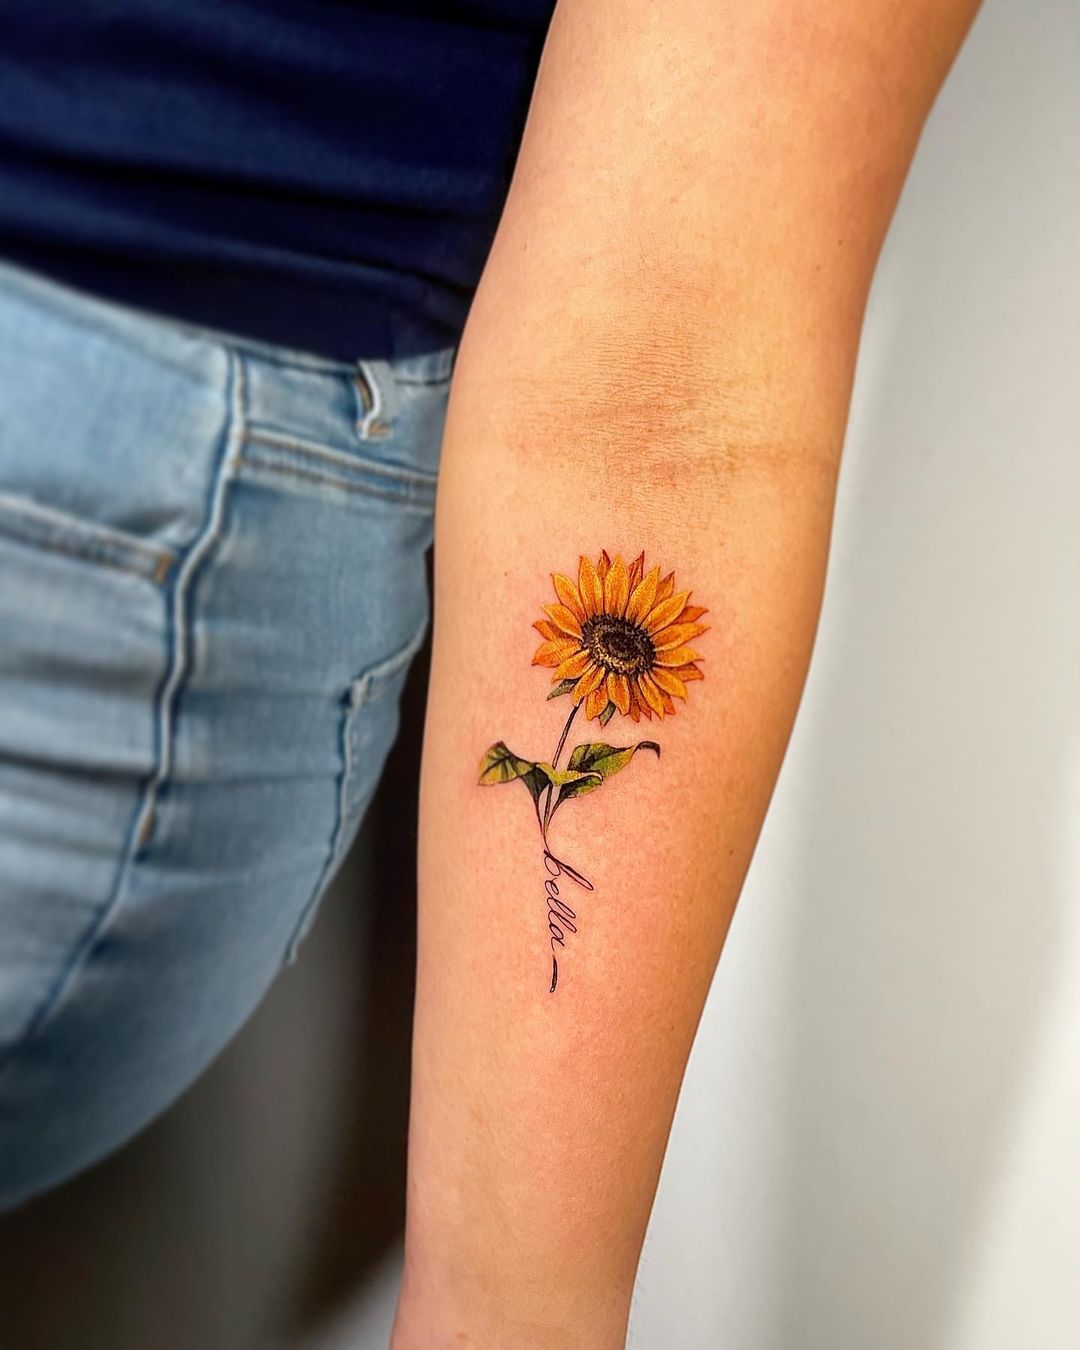 Vibrant Sunflower Forearm Tattoo With Script